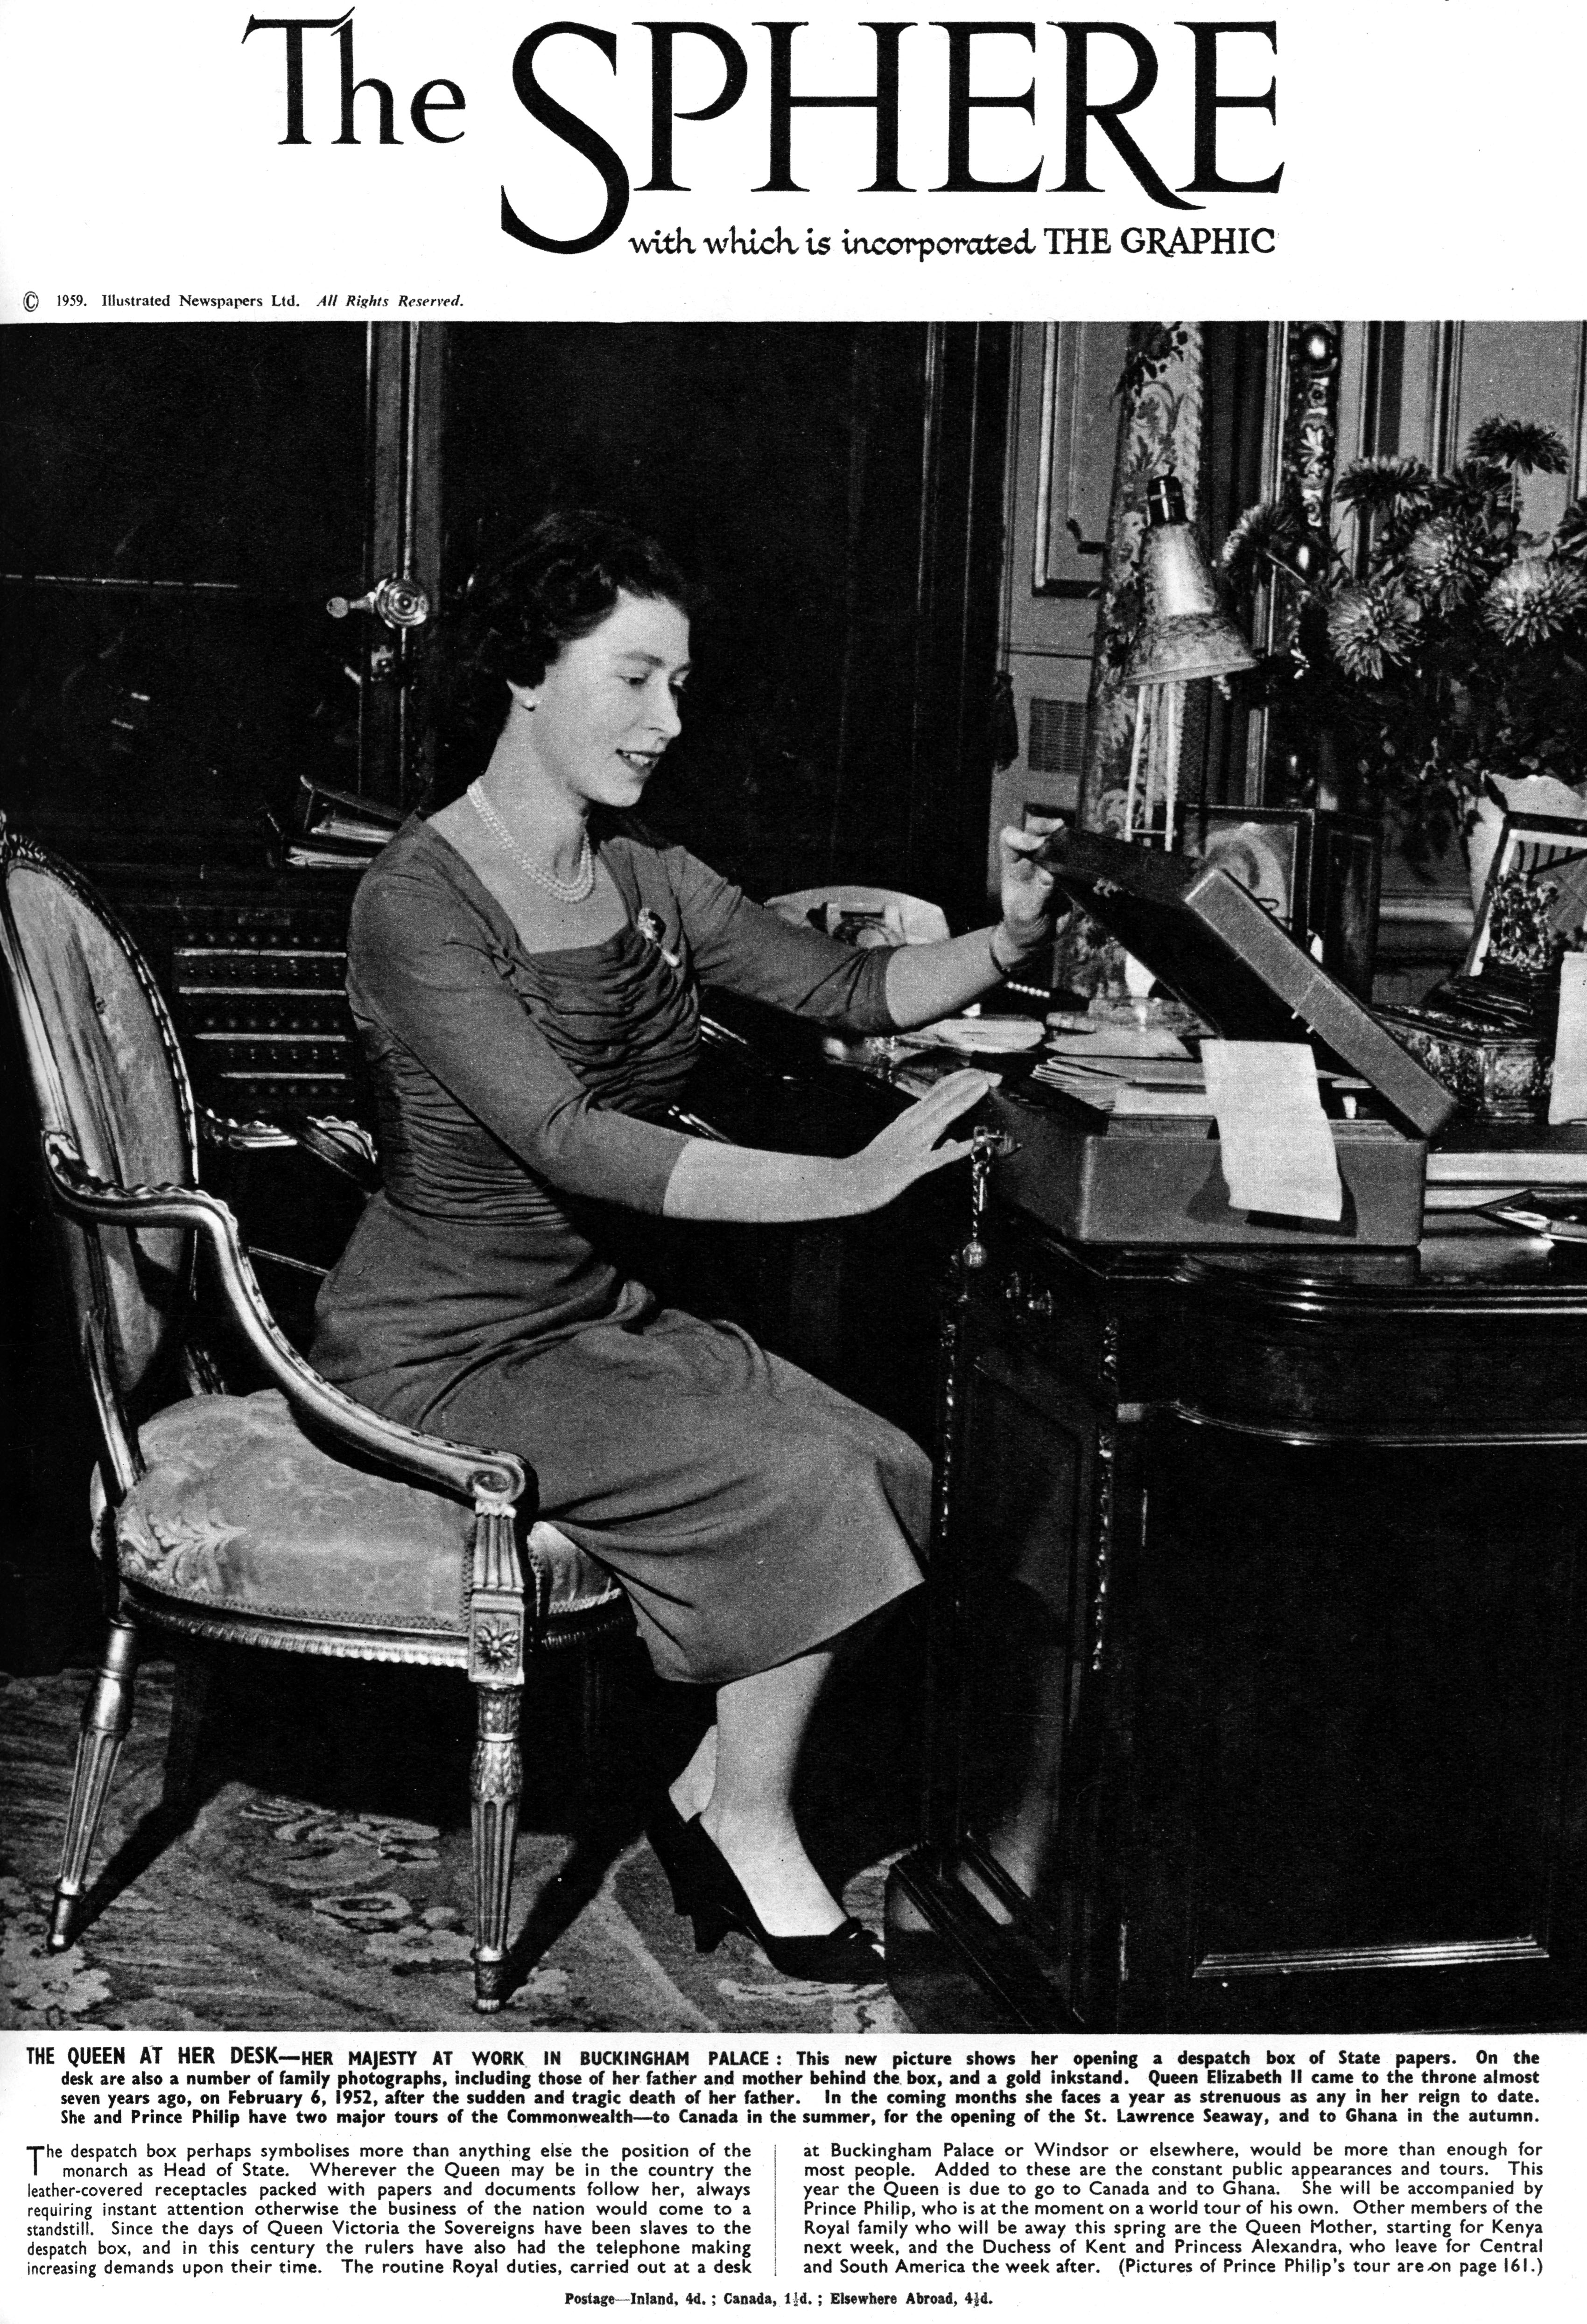 Queen Elizabeth II at work at Buckingham Palace with her dispatch box, on the cover of The Sphere magazine